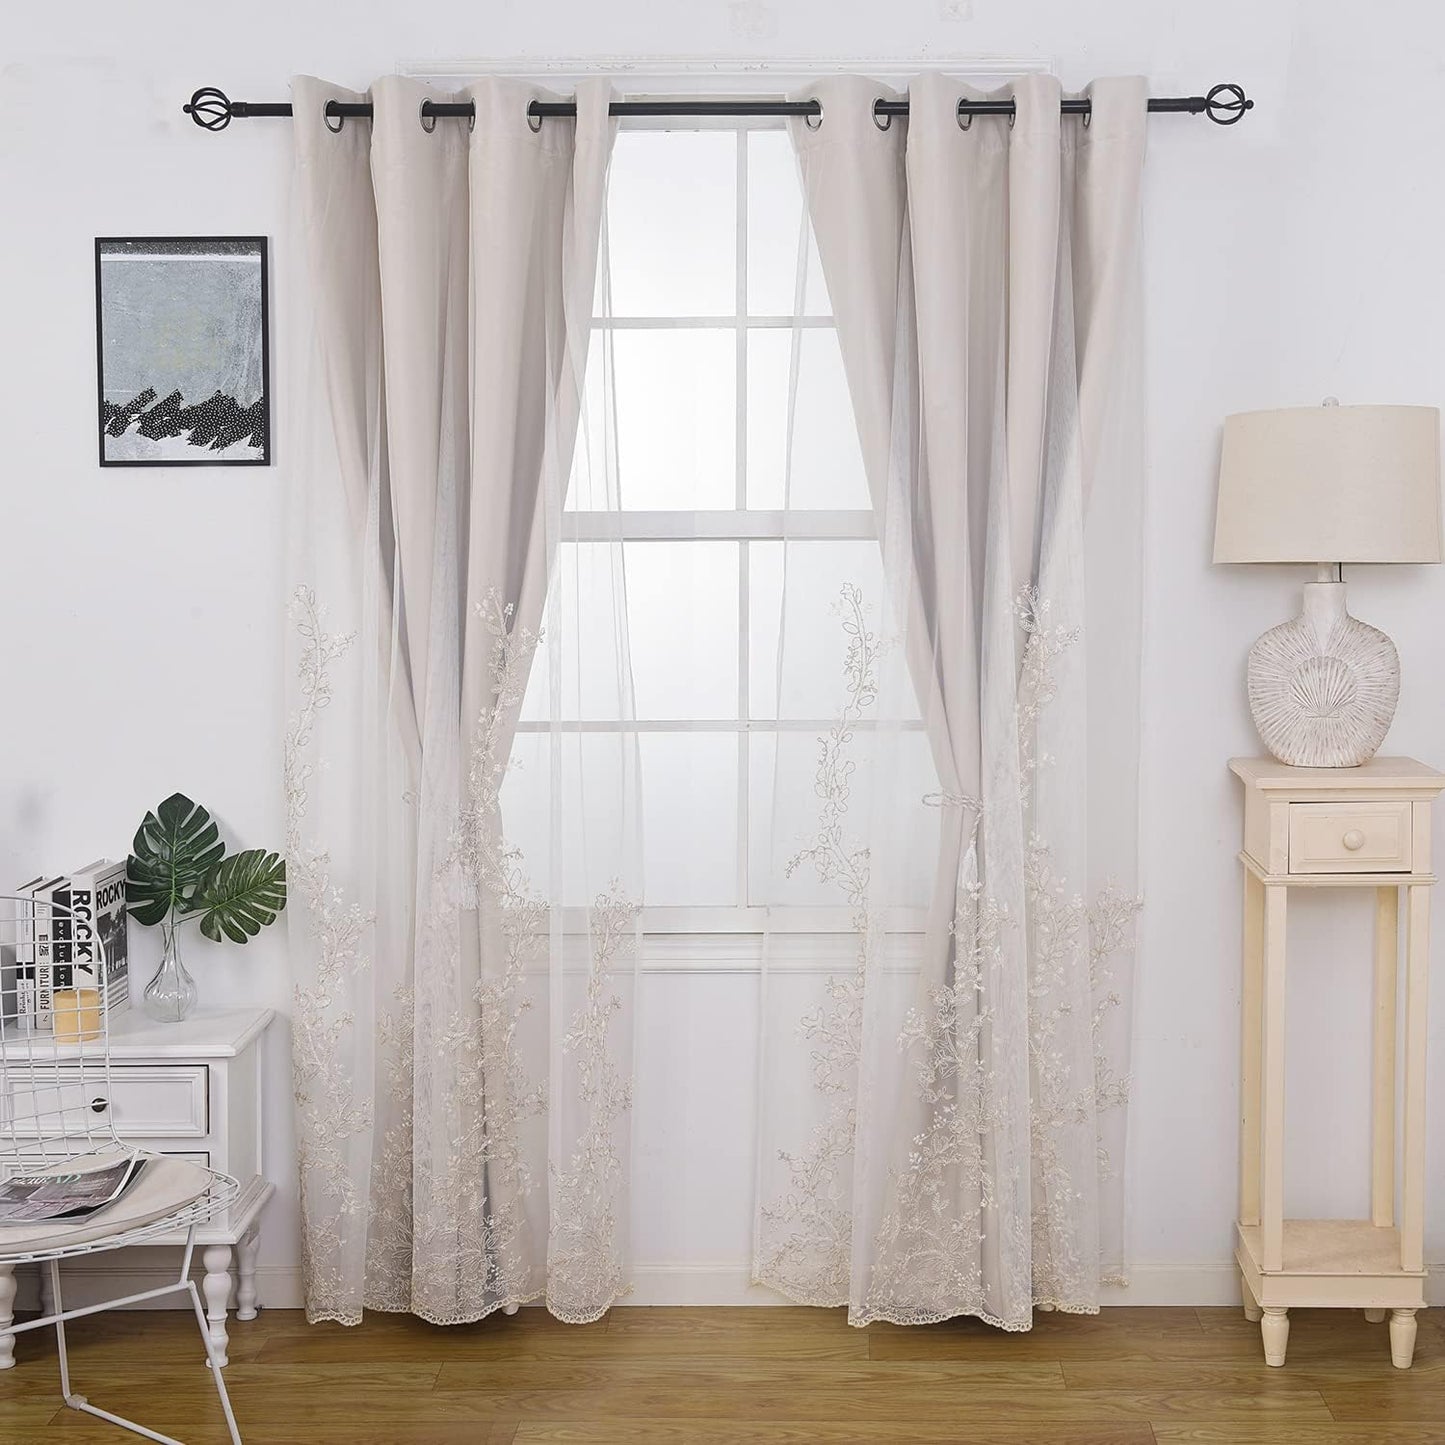 GYROHOME Double Layered Curtains with Embroidered White Sheer Tulle, Mix and Match Curtains Room Darkening Grommet Top Thermal Insulated Drapes,2Panels,52X84Inch,Beige  GYROHOME   